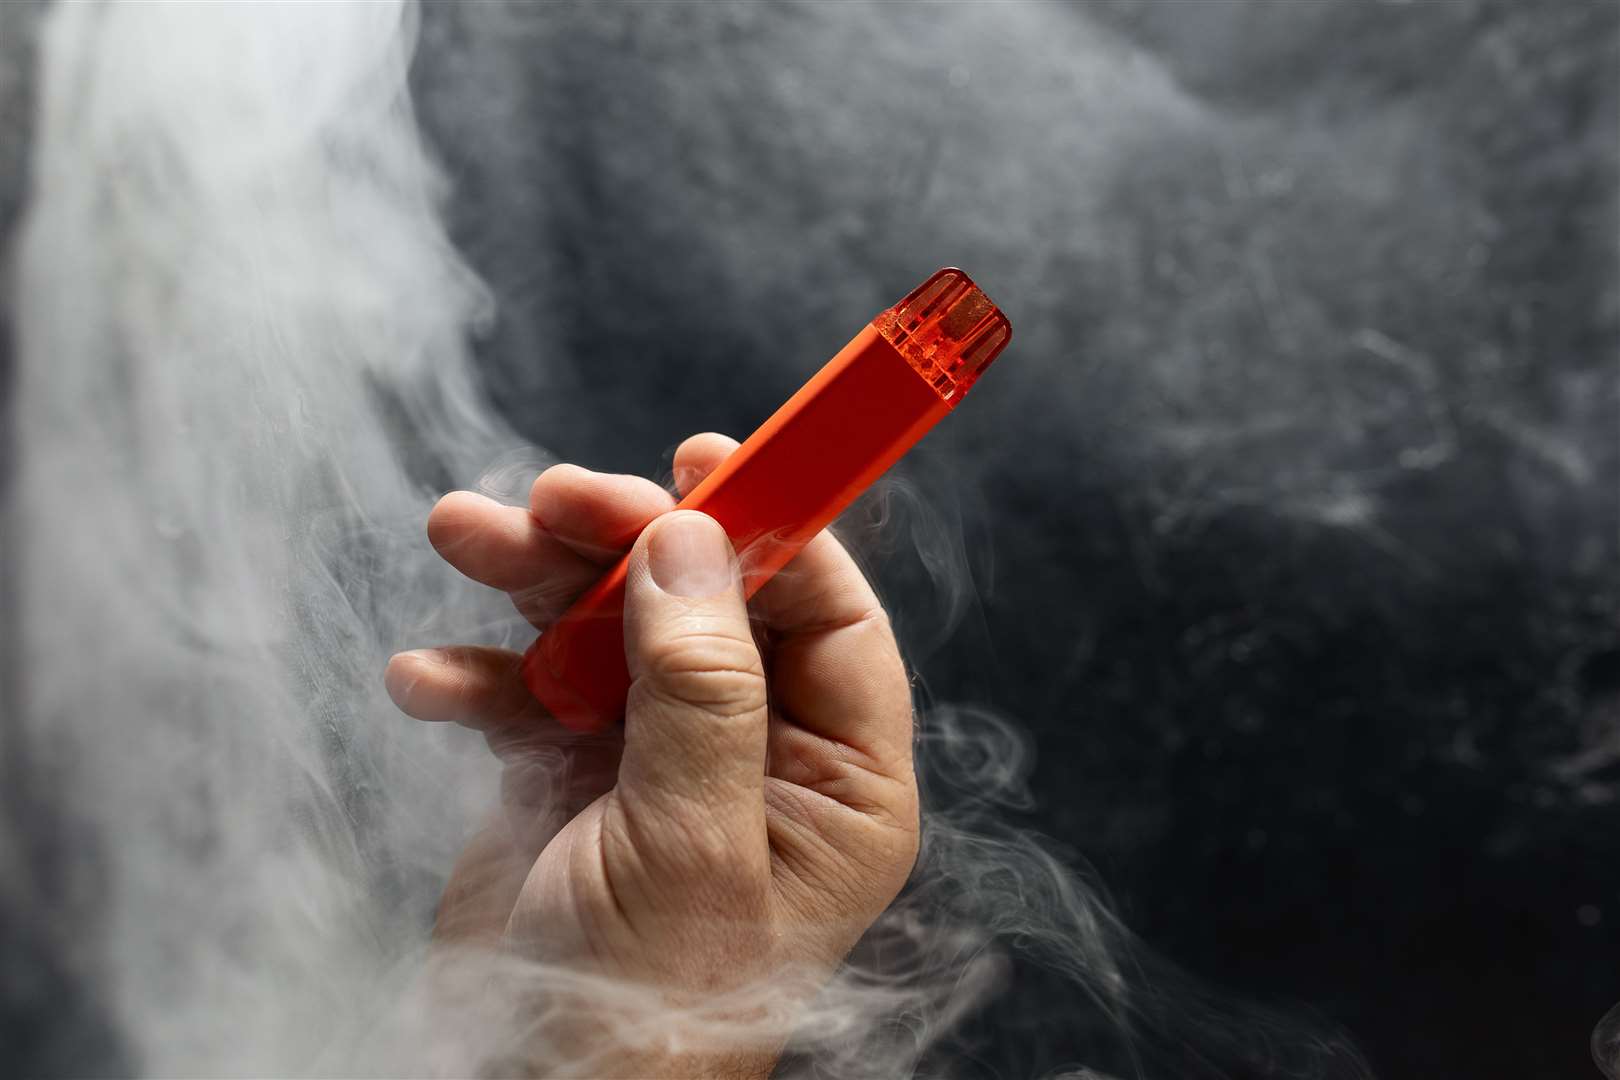 A ban on the sale and supply of single-use vapes in Scotland is due to come into effect on April 1 2025, under proposed legislation published.